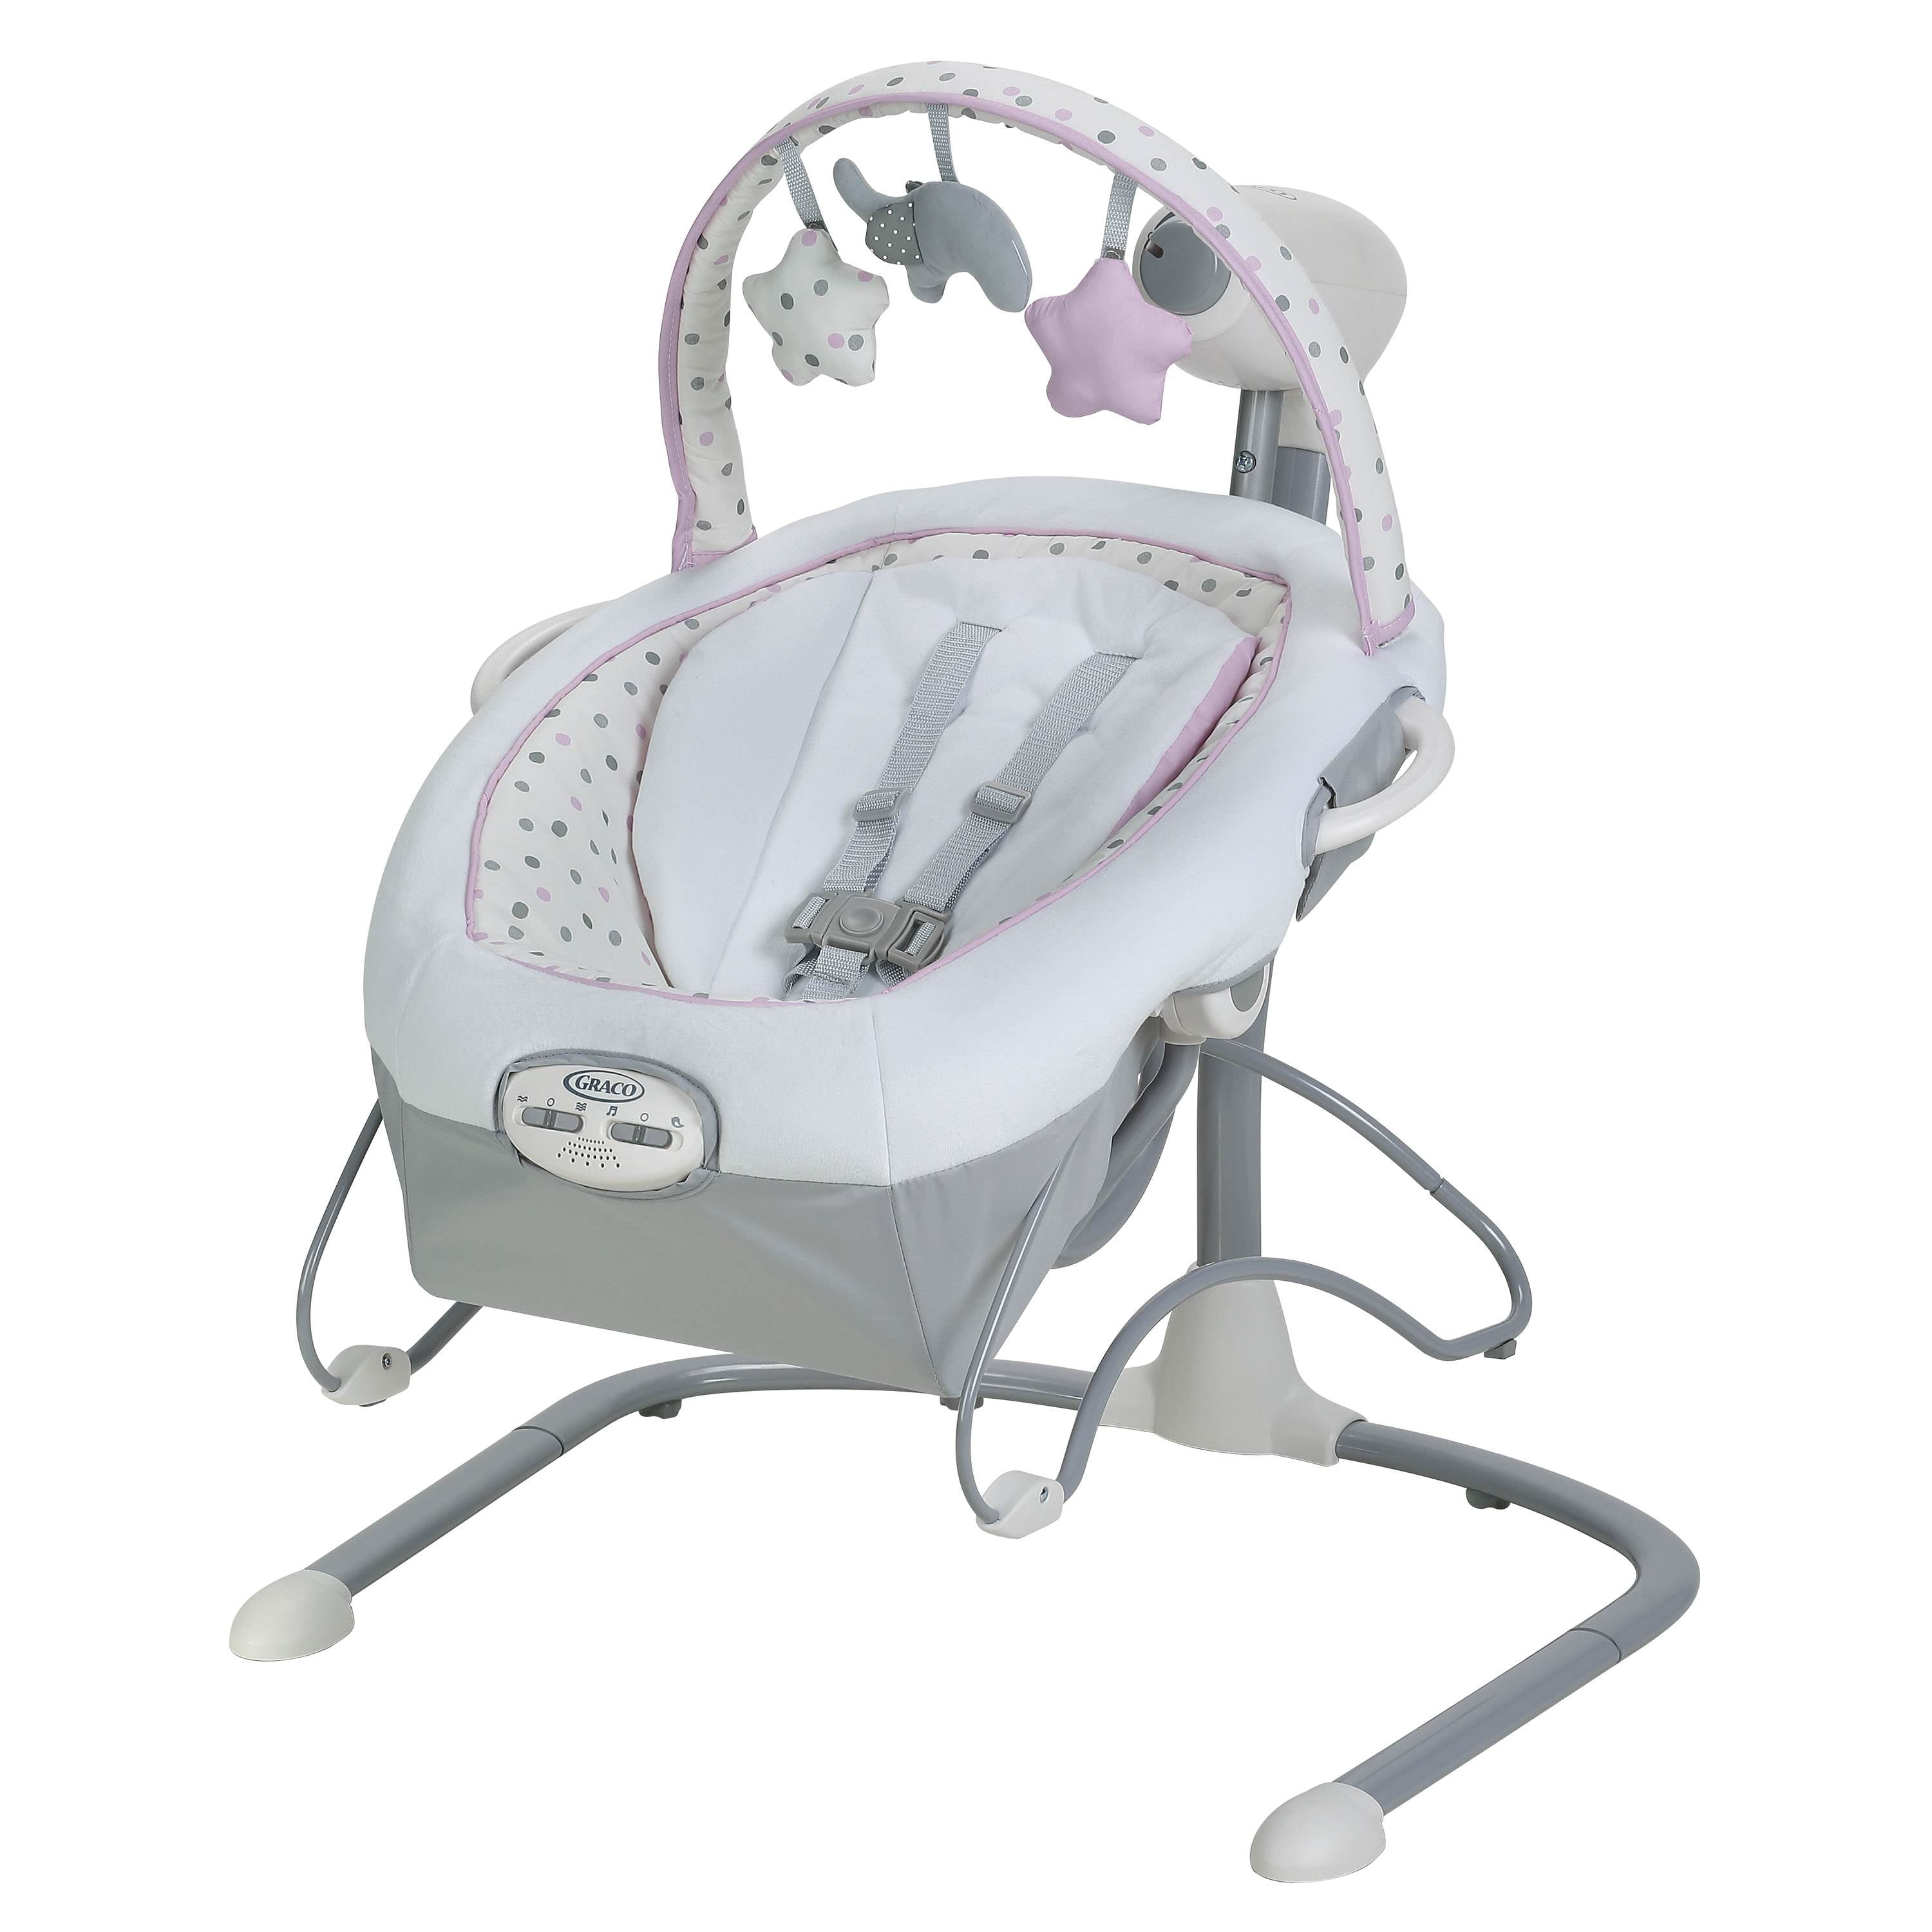 graco duetsoothe not working